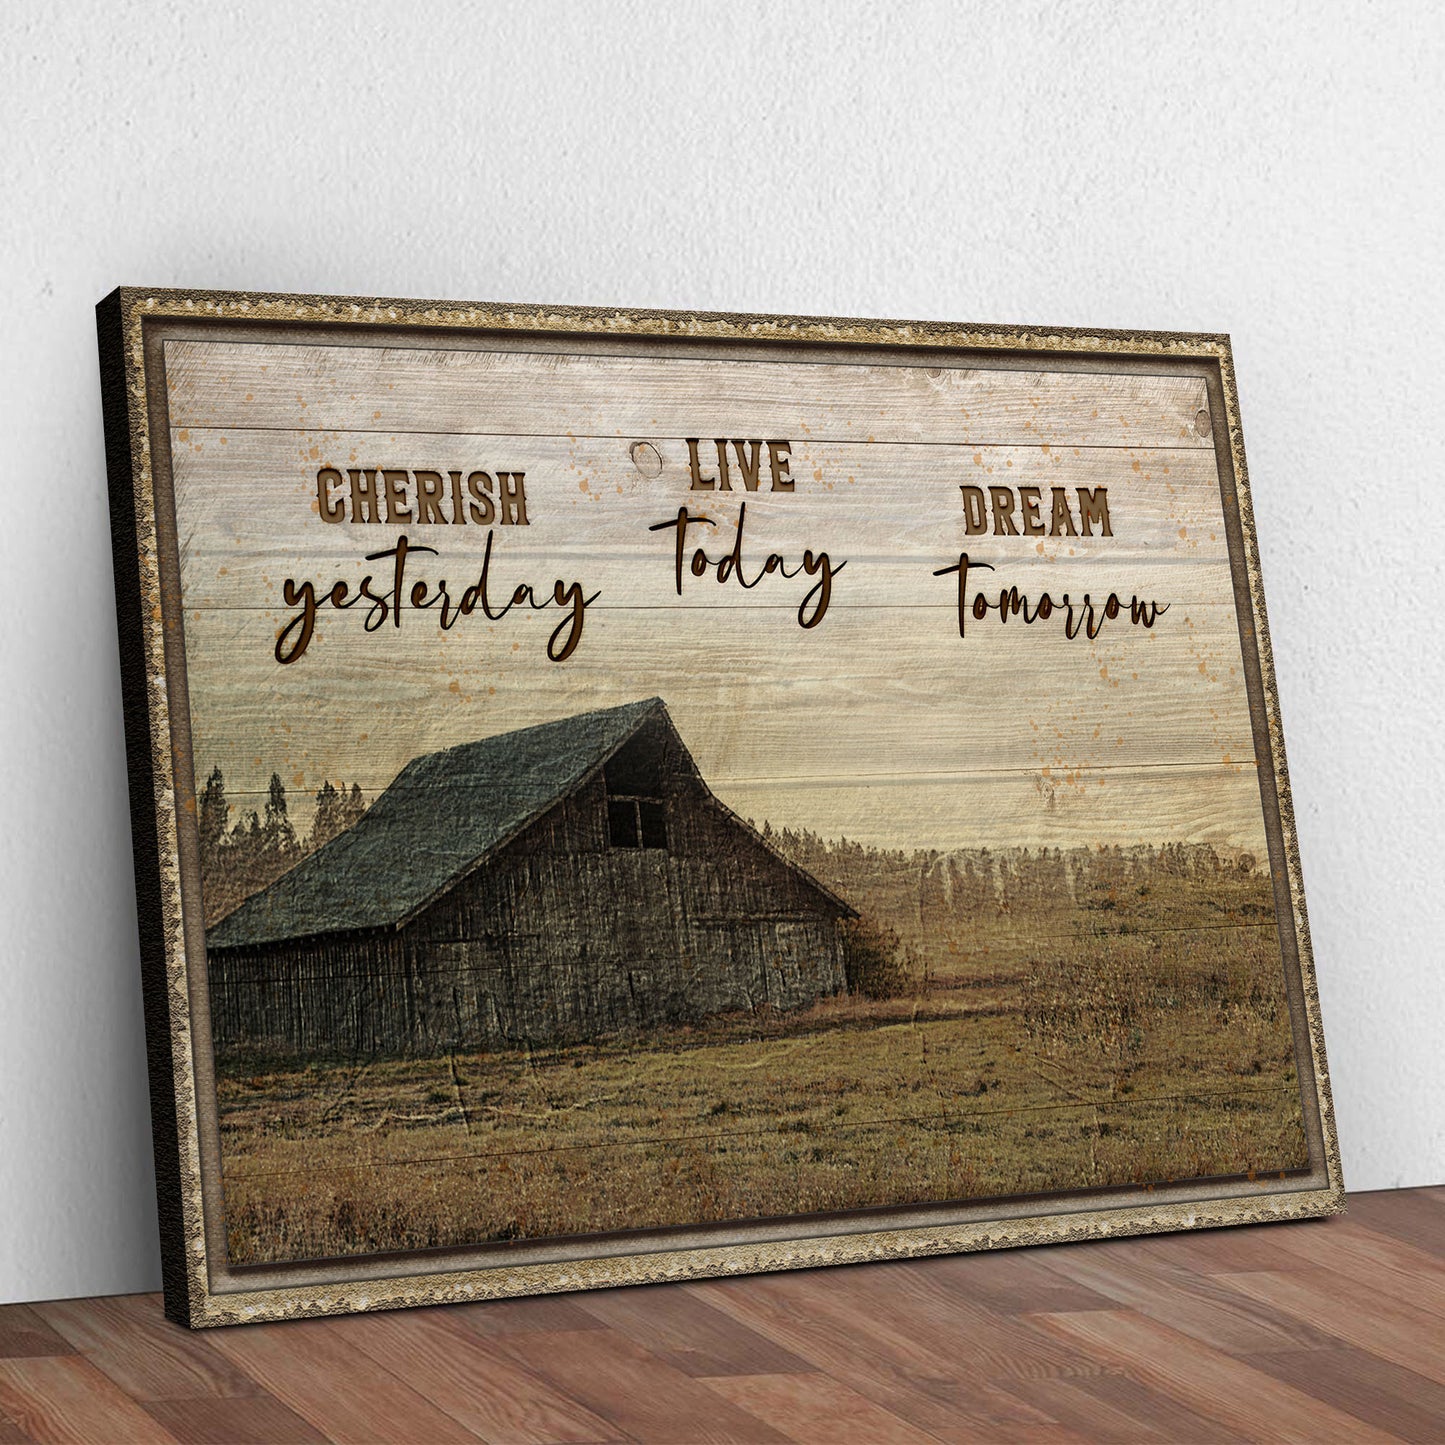 Cherish Yesterday, Live Today, Dream Tomorrow Sign Style 1 - Image by Tailored Canvases